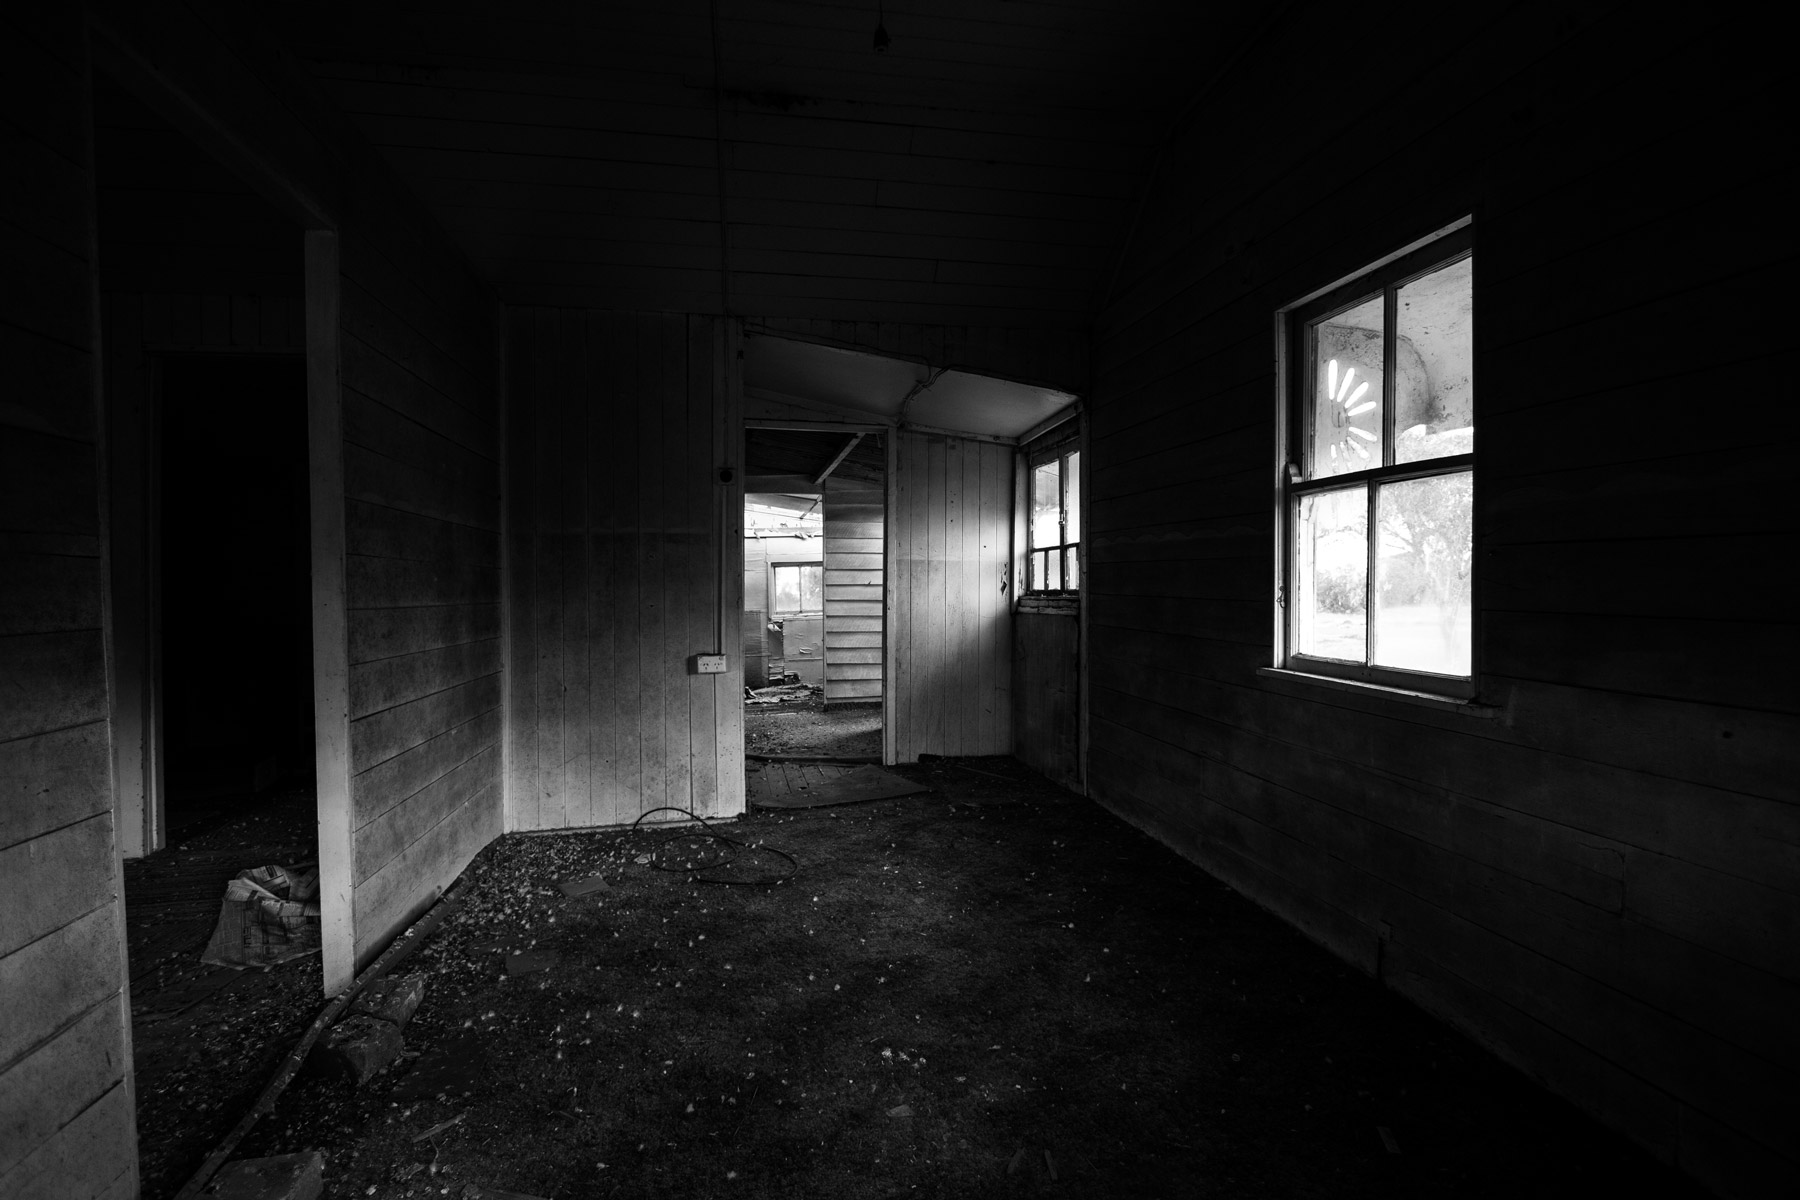 A room inside an abandoned house in Acland, Australia